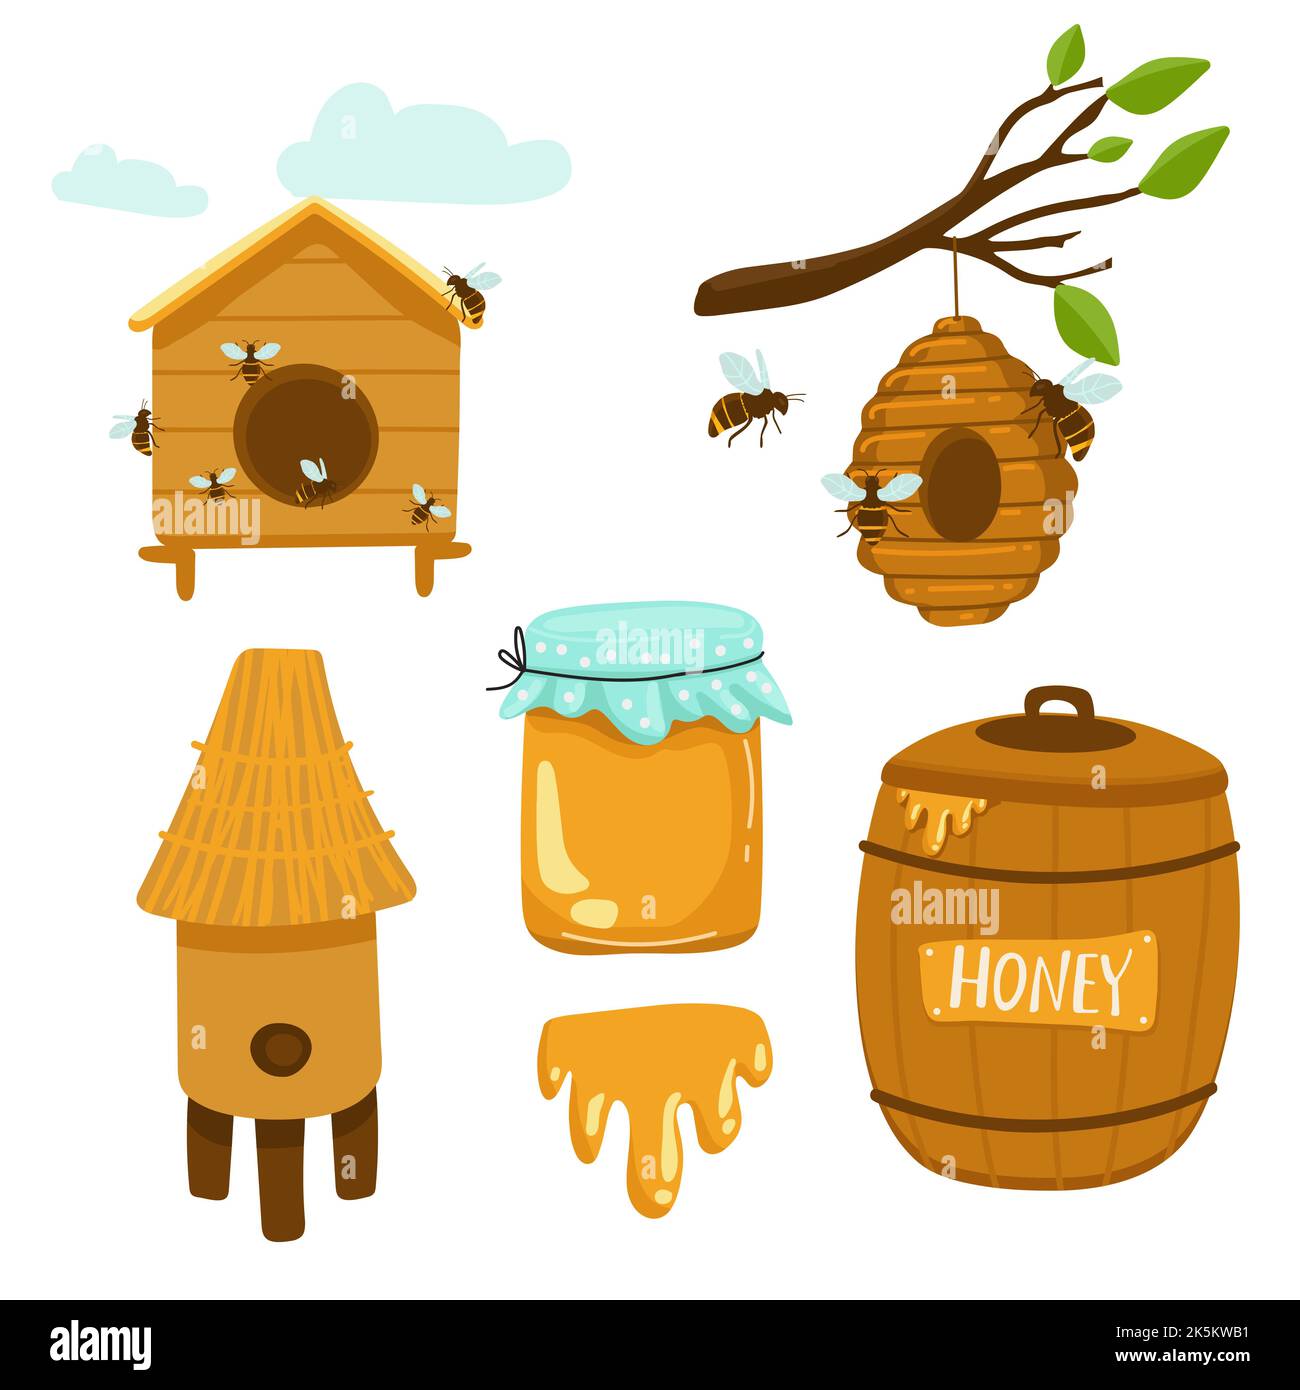 Honey Production Apiary Farm Products and Equipment, Glass Jars, Bee Hive on Tree, Wooden Dipper and Barrel with Bowl, Honeycombs, Sweet Liquid, Healt Stock Vector